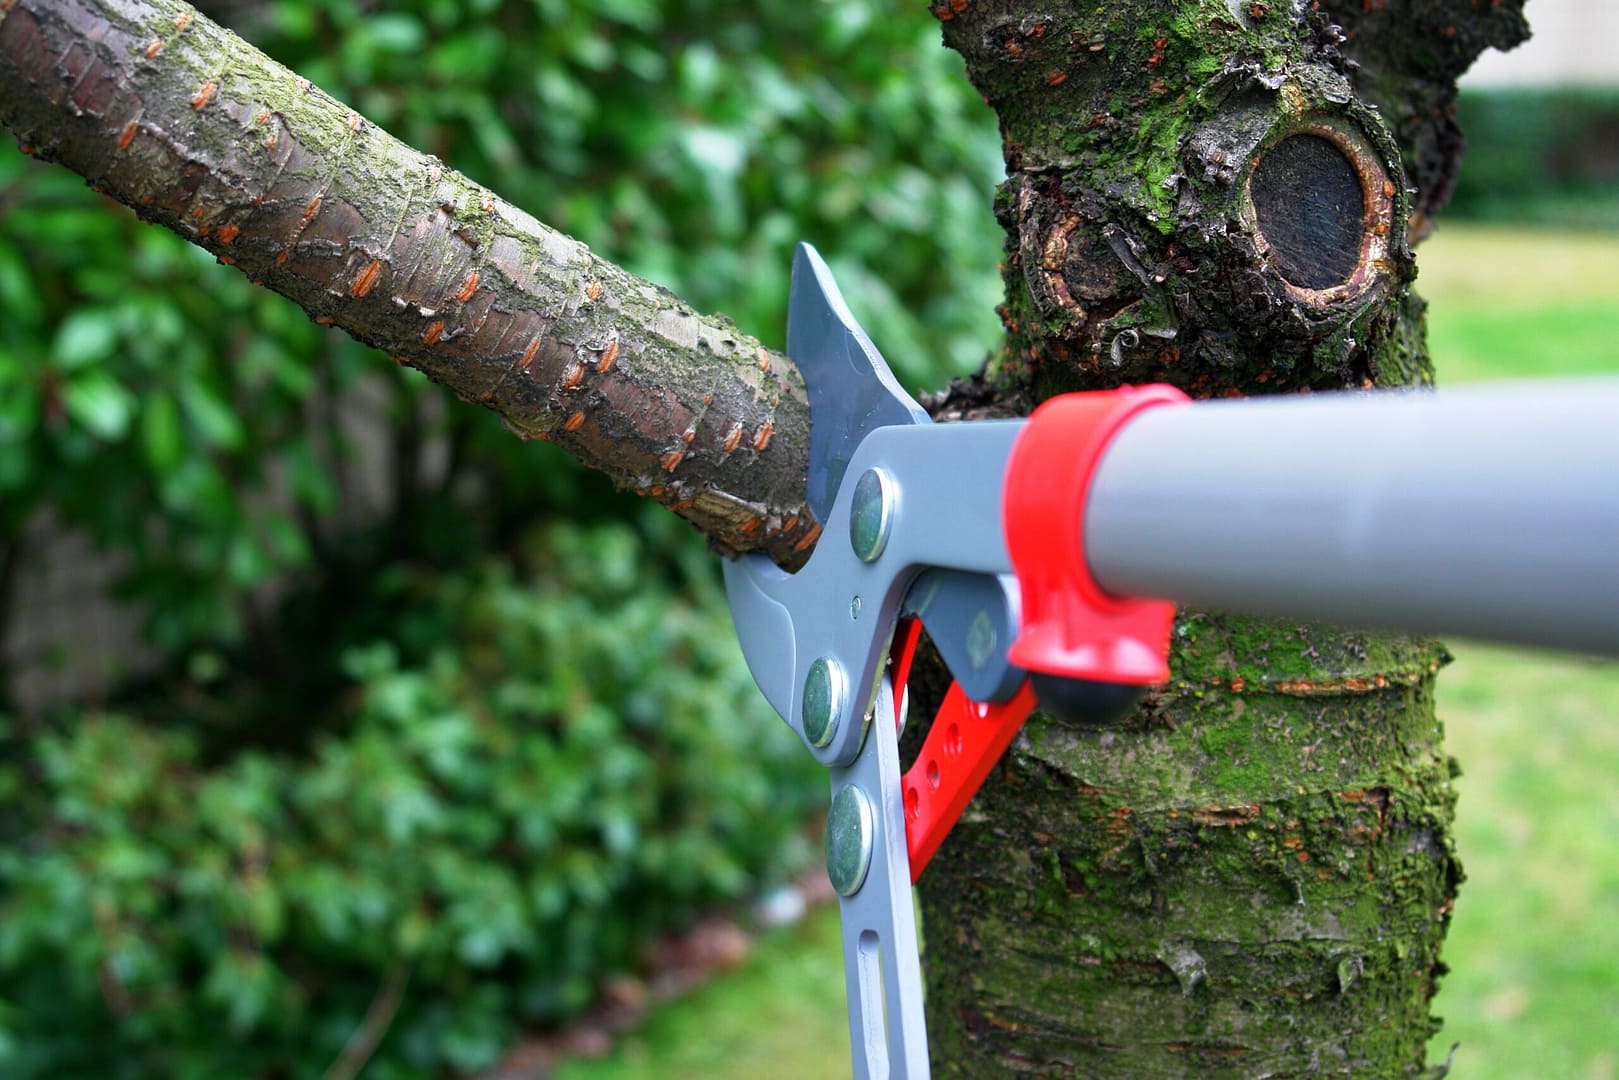 An arborist carefully trimming and shaping branches of a mature tree with pruning shears.